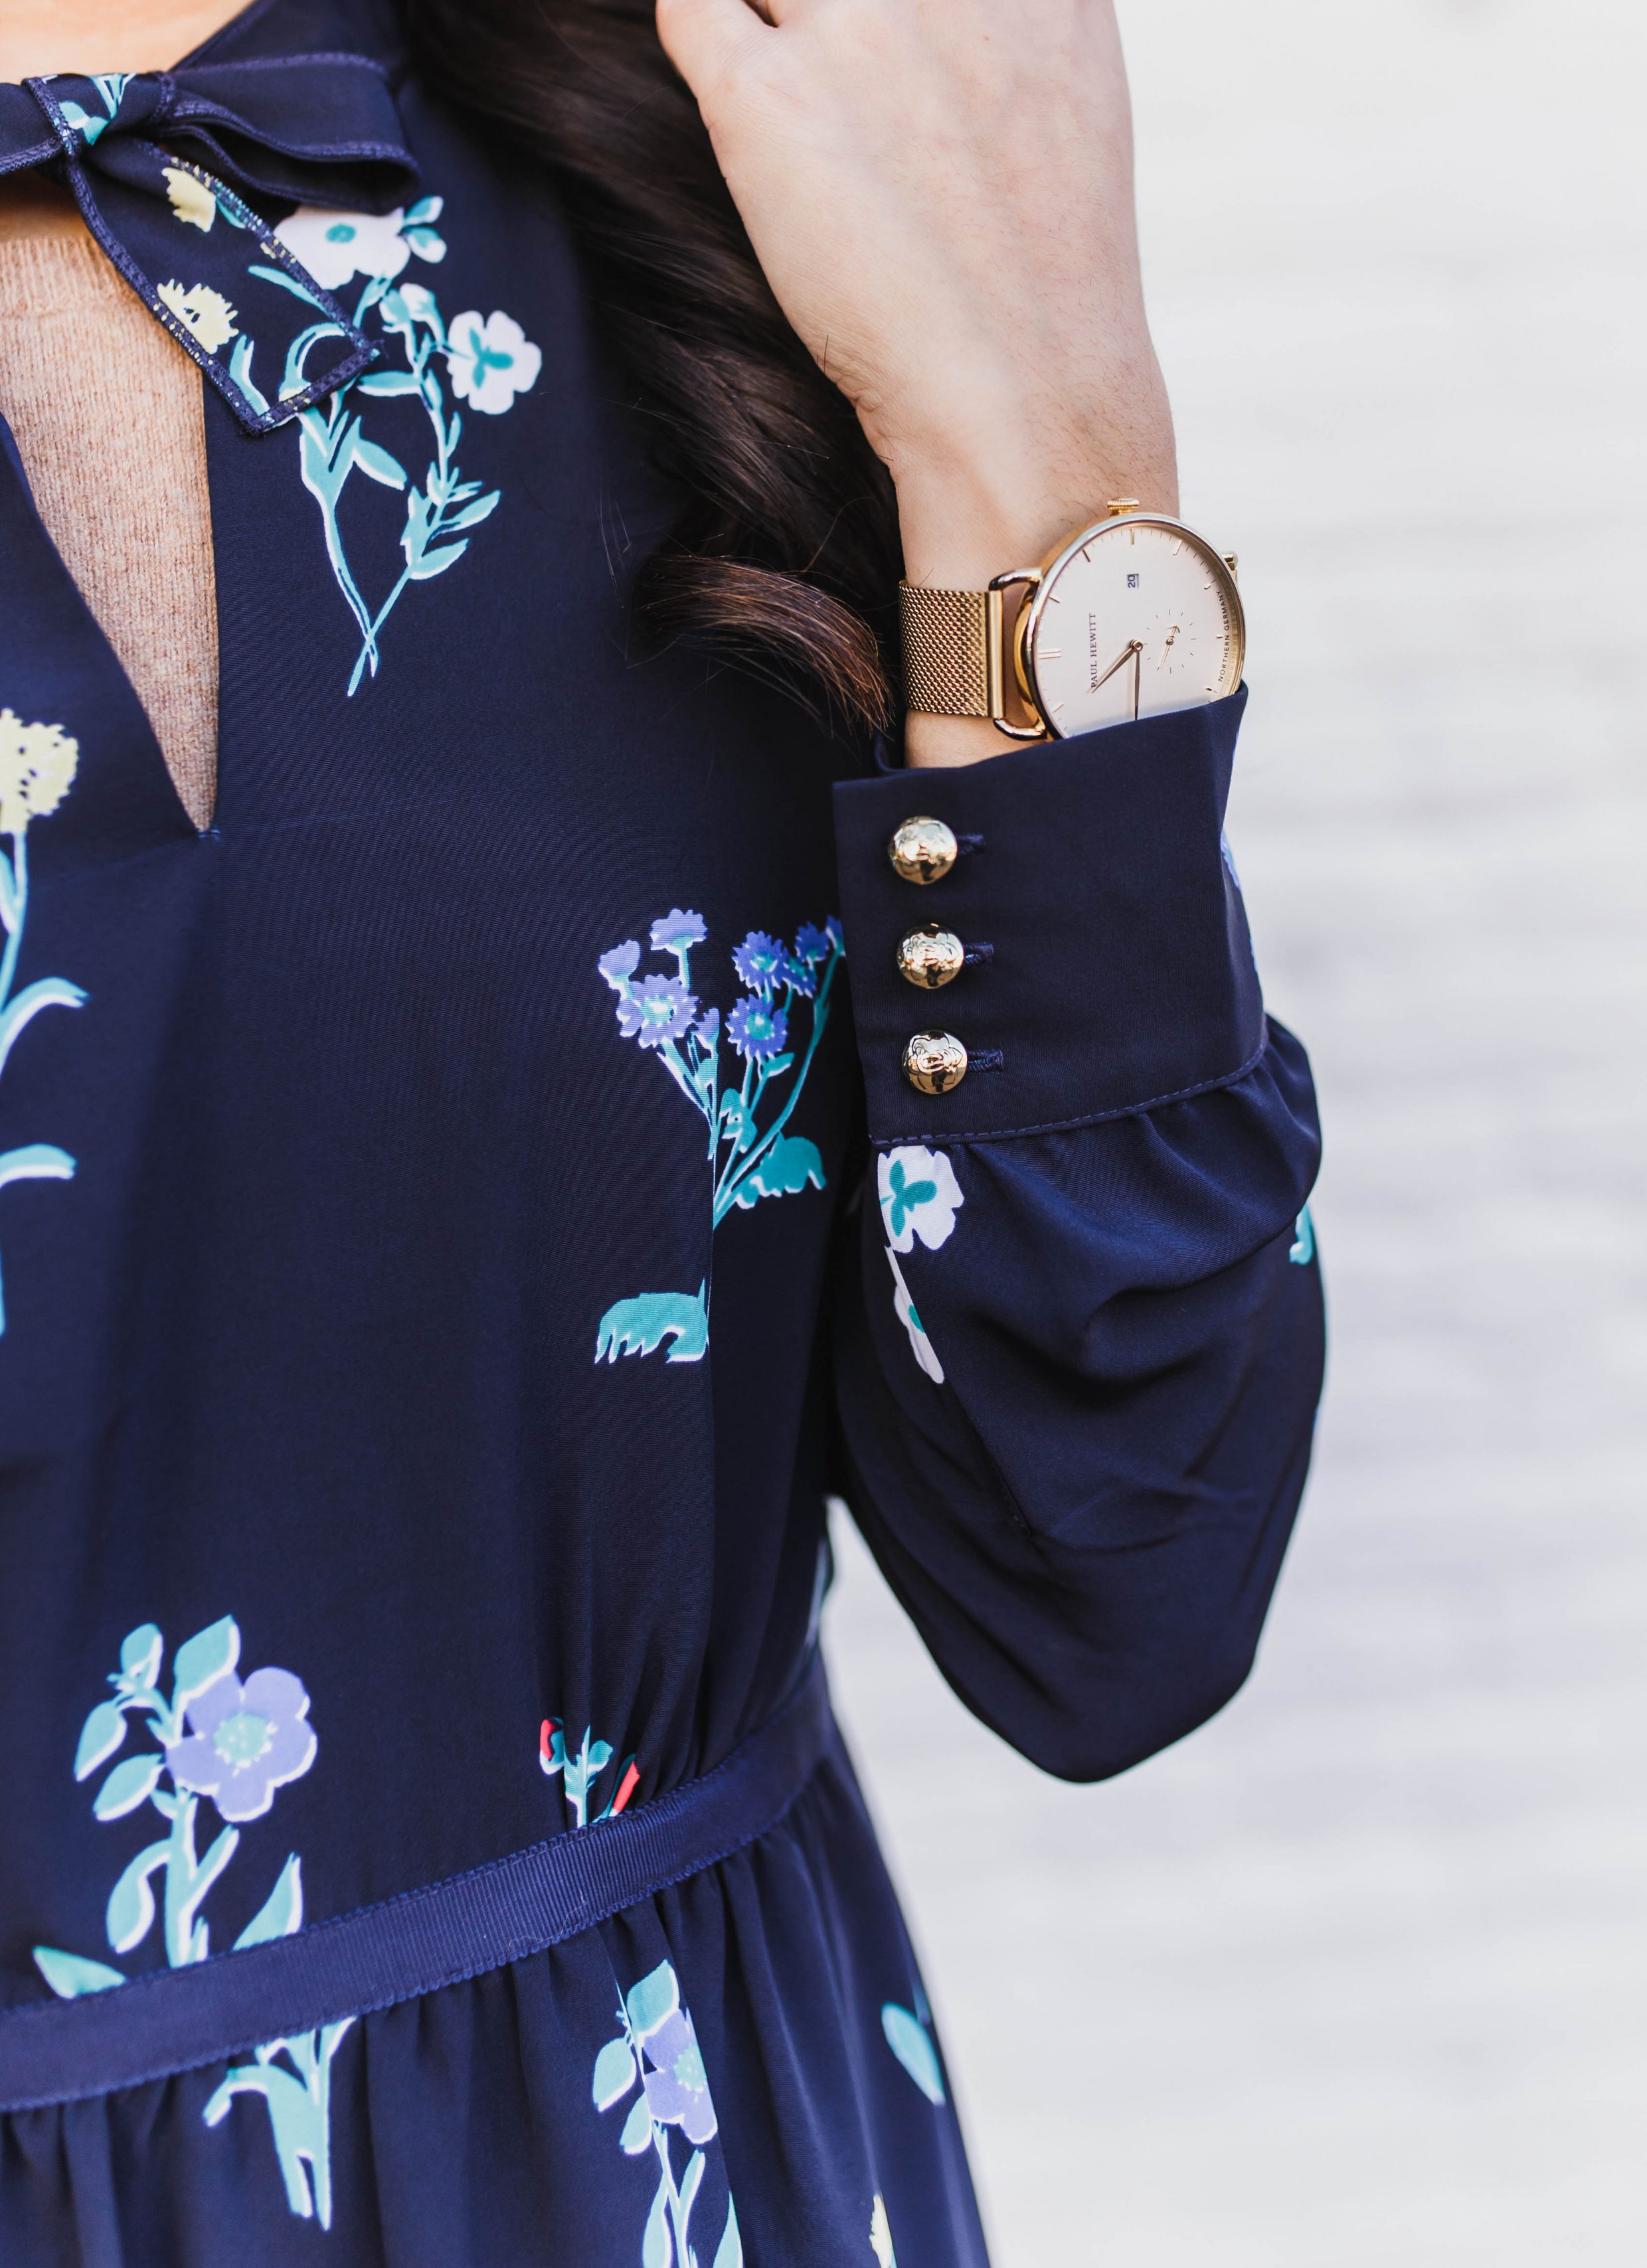 Blogger Hoang-Kim wears the Tisdale floral dress for Spring with a gold Paul Hewitt watch